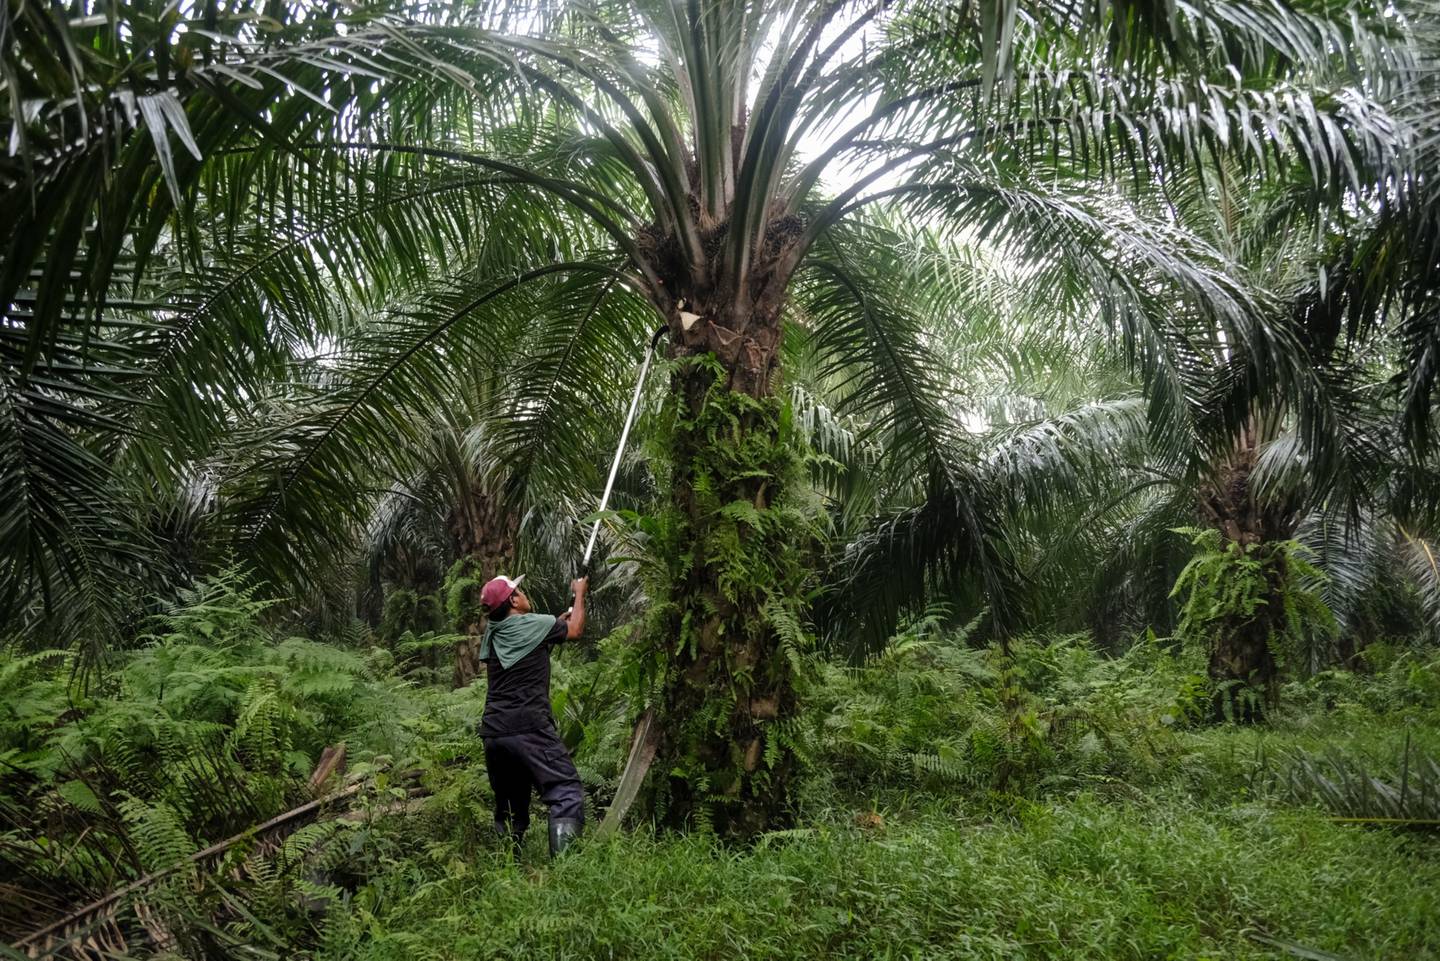 A worker uses a motorized harvesting sickle to cut a palm oil fruit bunch from a tree at a plantation in Kapar, Selangor, Malaysia, on Tuesday, Jan. 11, 2022. Palm oil swung between gains and losses as investors weighed weaker demand for the tropical oil against tighter supplies amid weather and labor problems in No. 2 grower Malaysia. Photographer: Samsul Said/Bloombergdfd